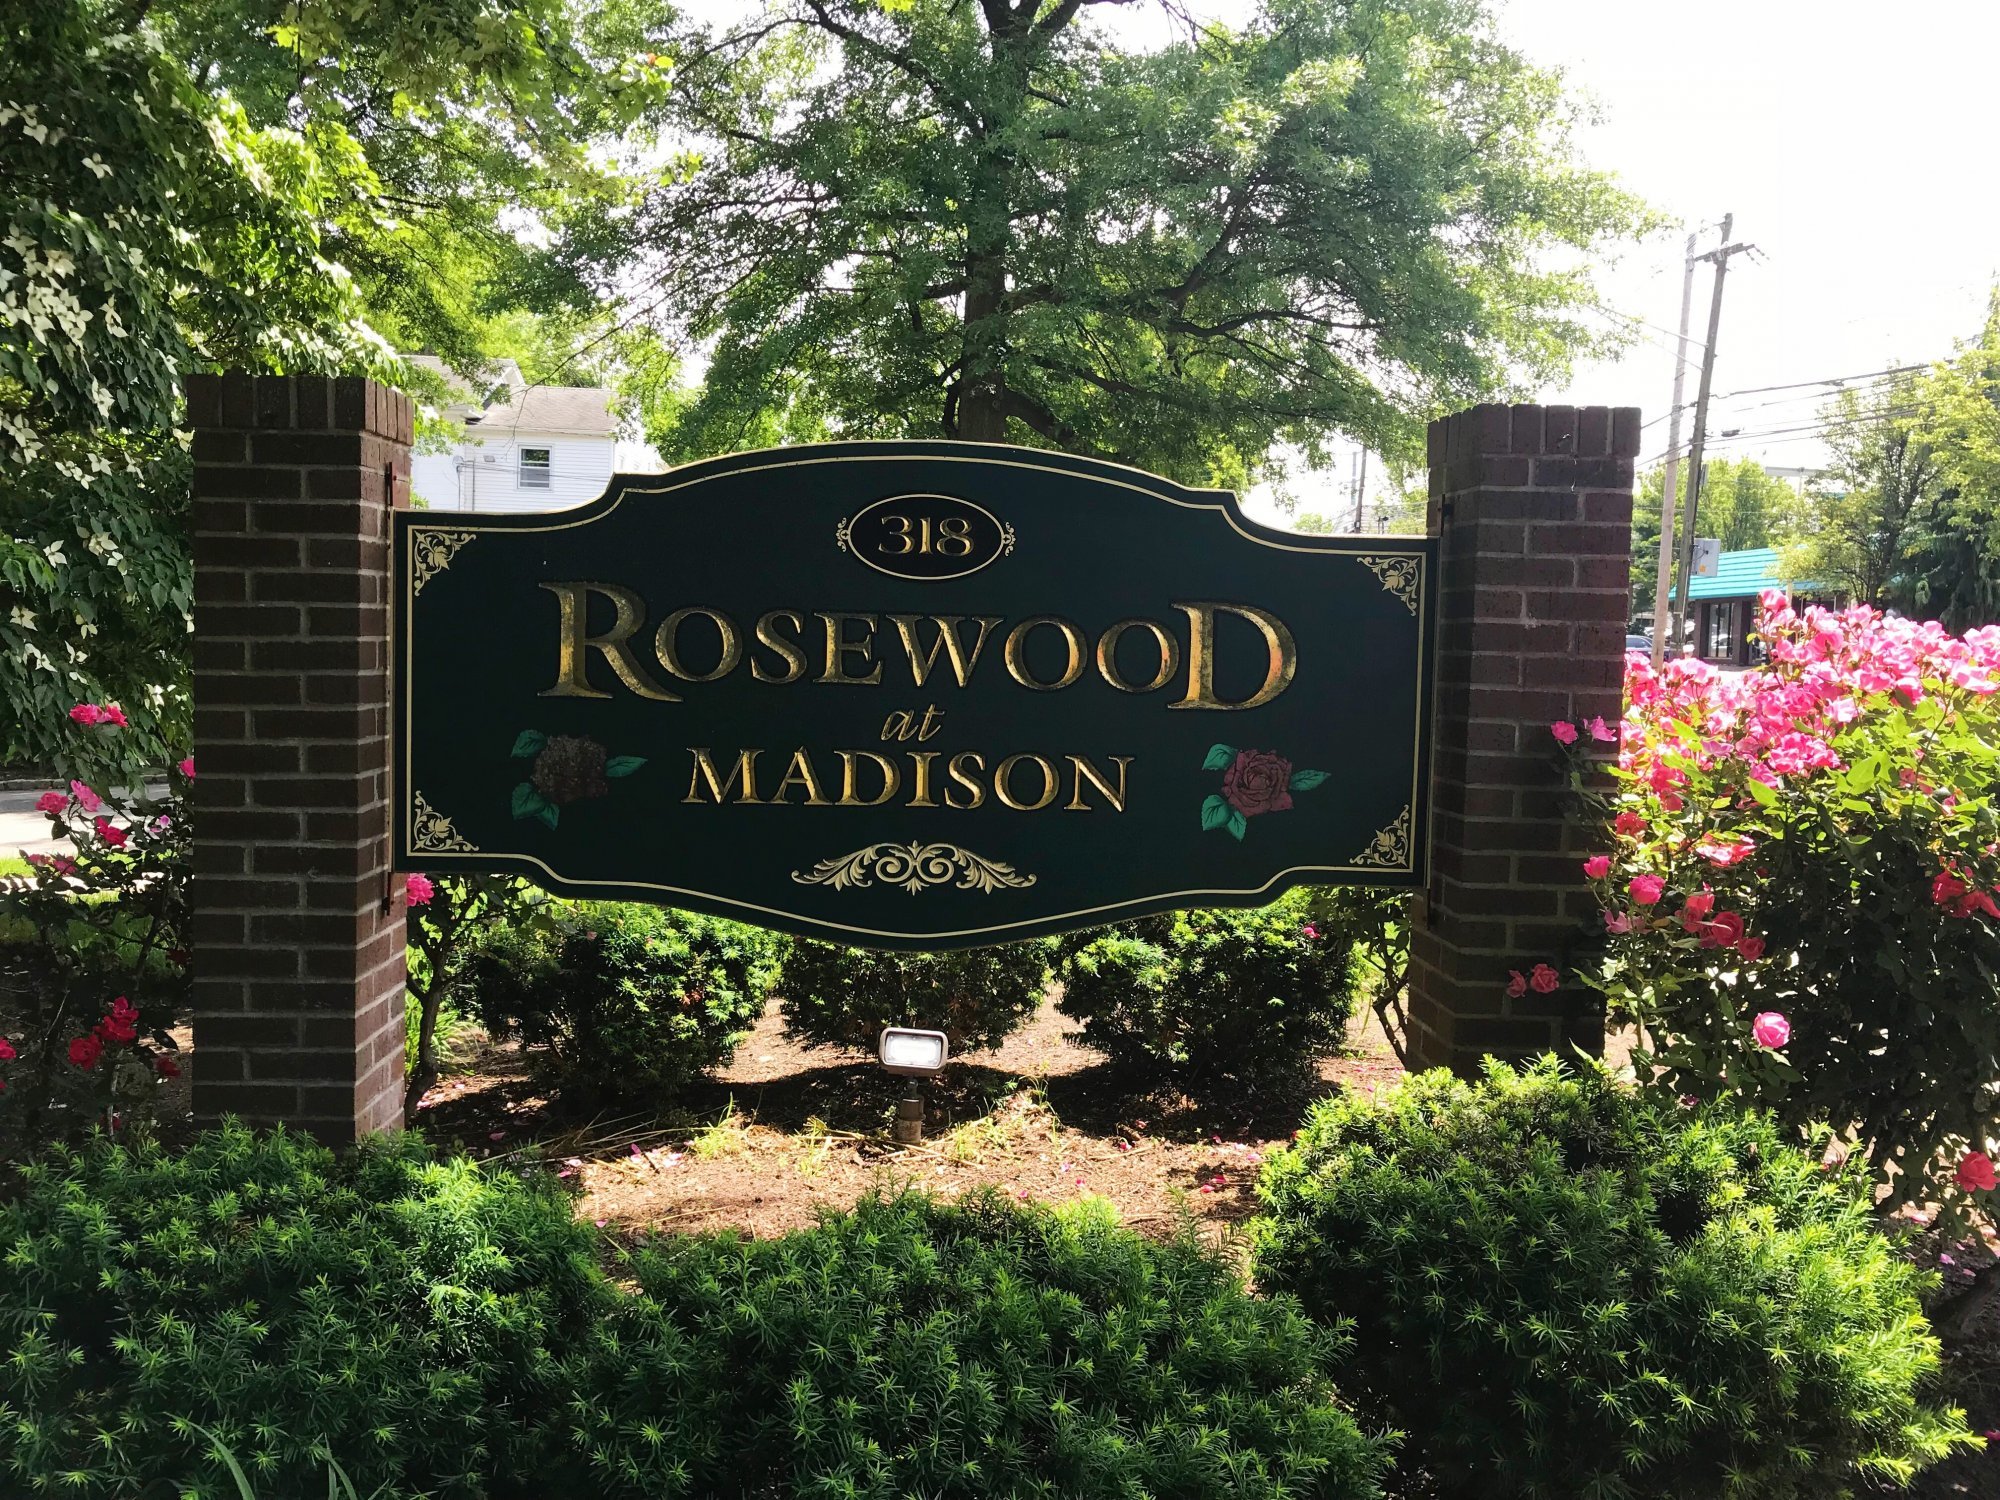 Townhomes for sale Rosewood at Madison Townhomes Madison, NJ